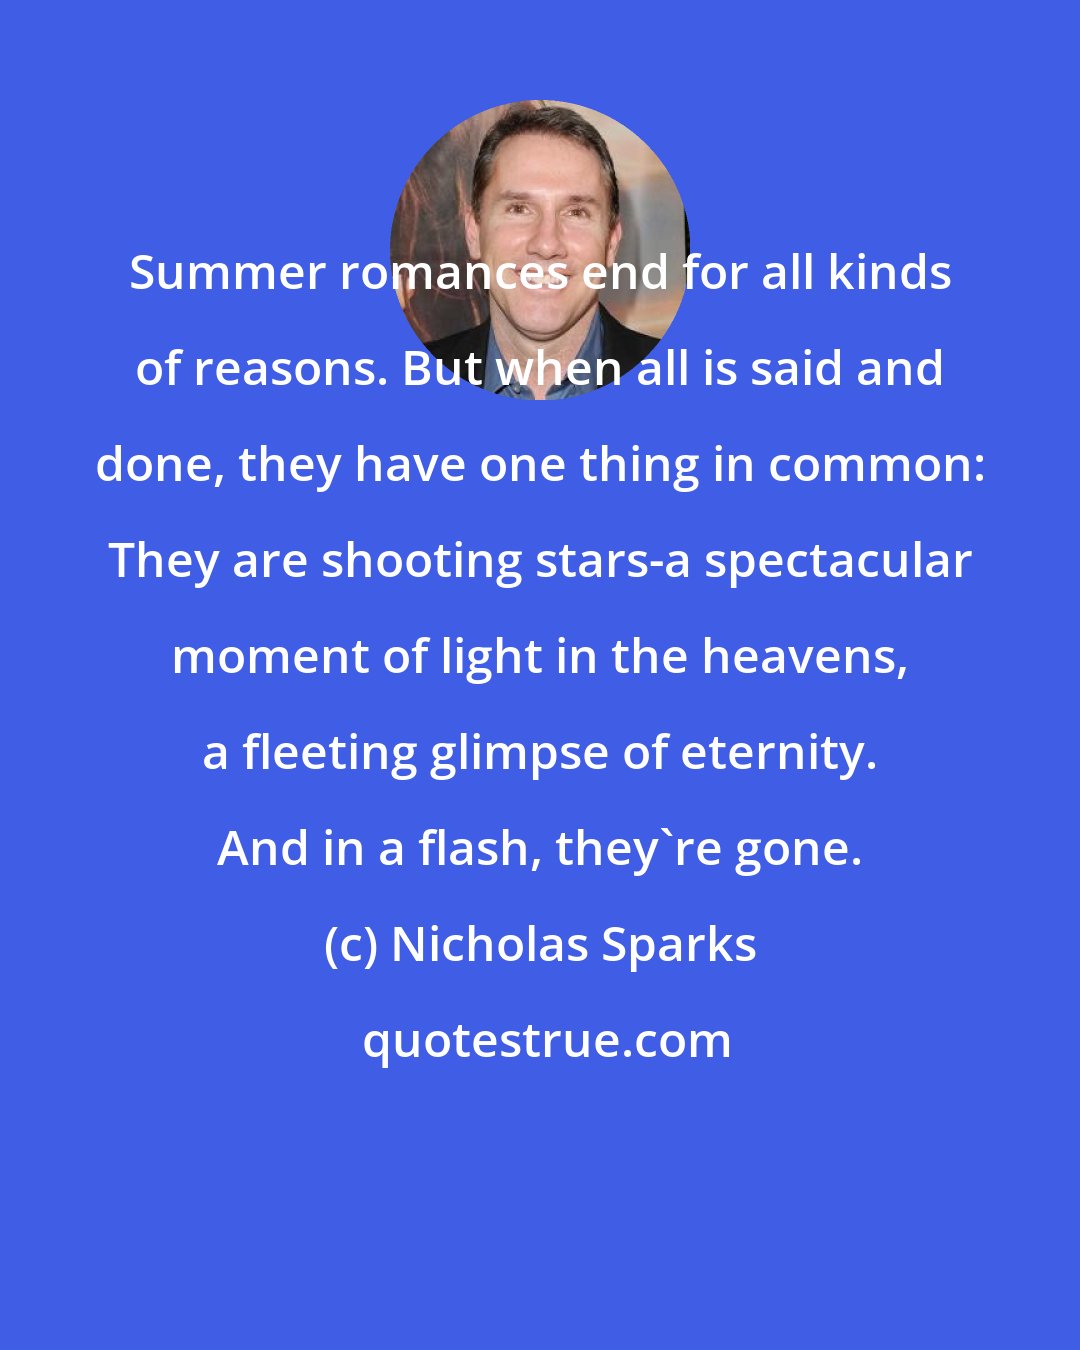 Nicholas Sparks: Summer romances end for all kinds of reasons. But when all is said and done, they have one thing in common: They are shooting stars-a spectacular moment of light in the heavens, a fleeting glimpse of eternity. And in a flash, they're gone.